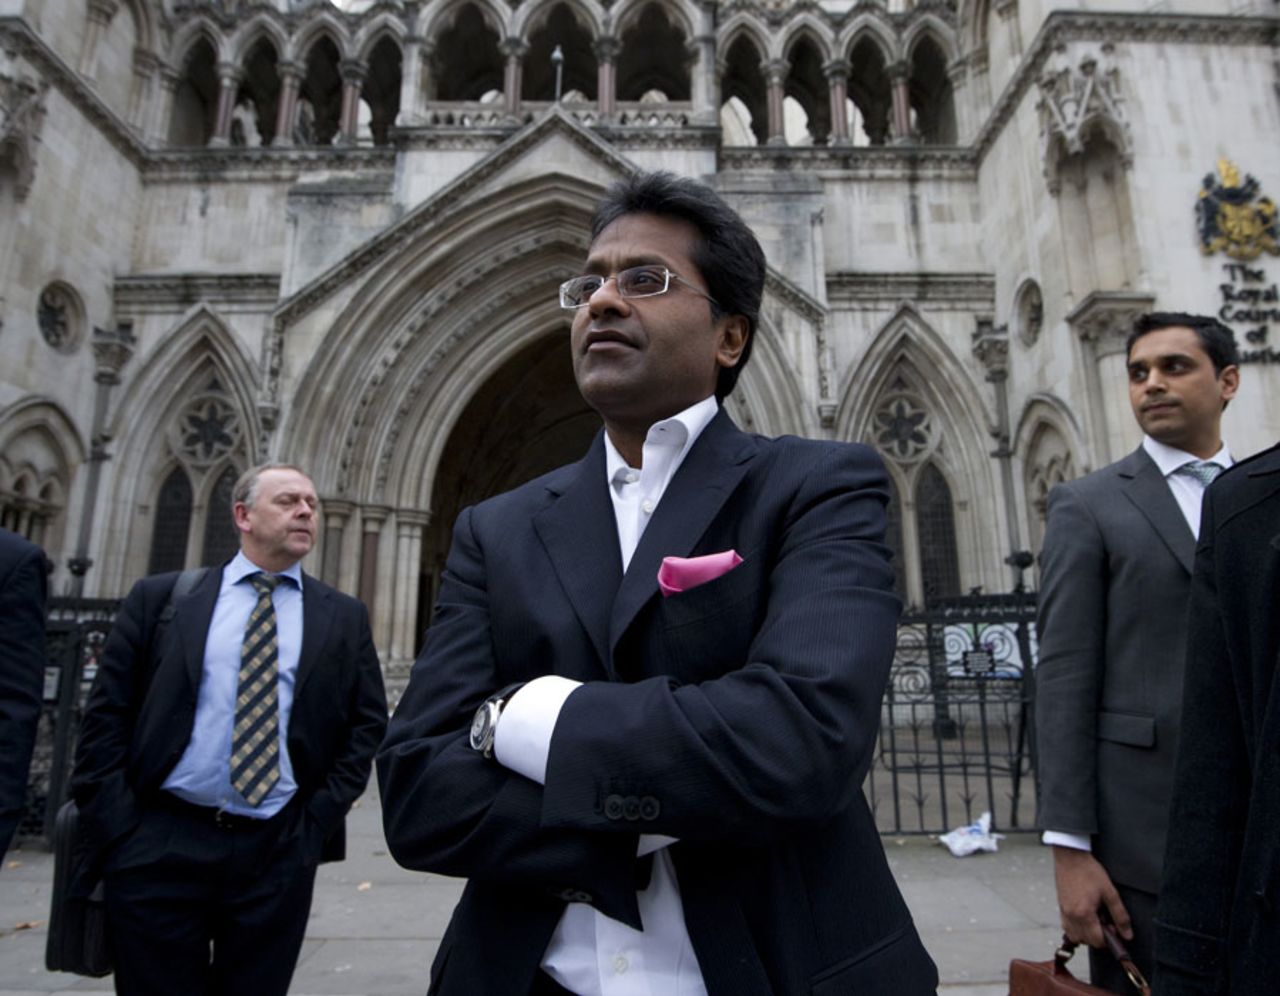 Lalit Modi leaves the High Court in London after a hearing in a libel case against him, London, March, 5, 2012